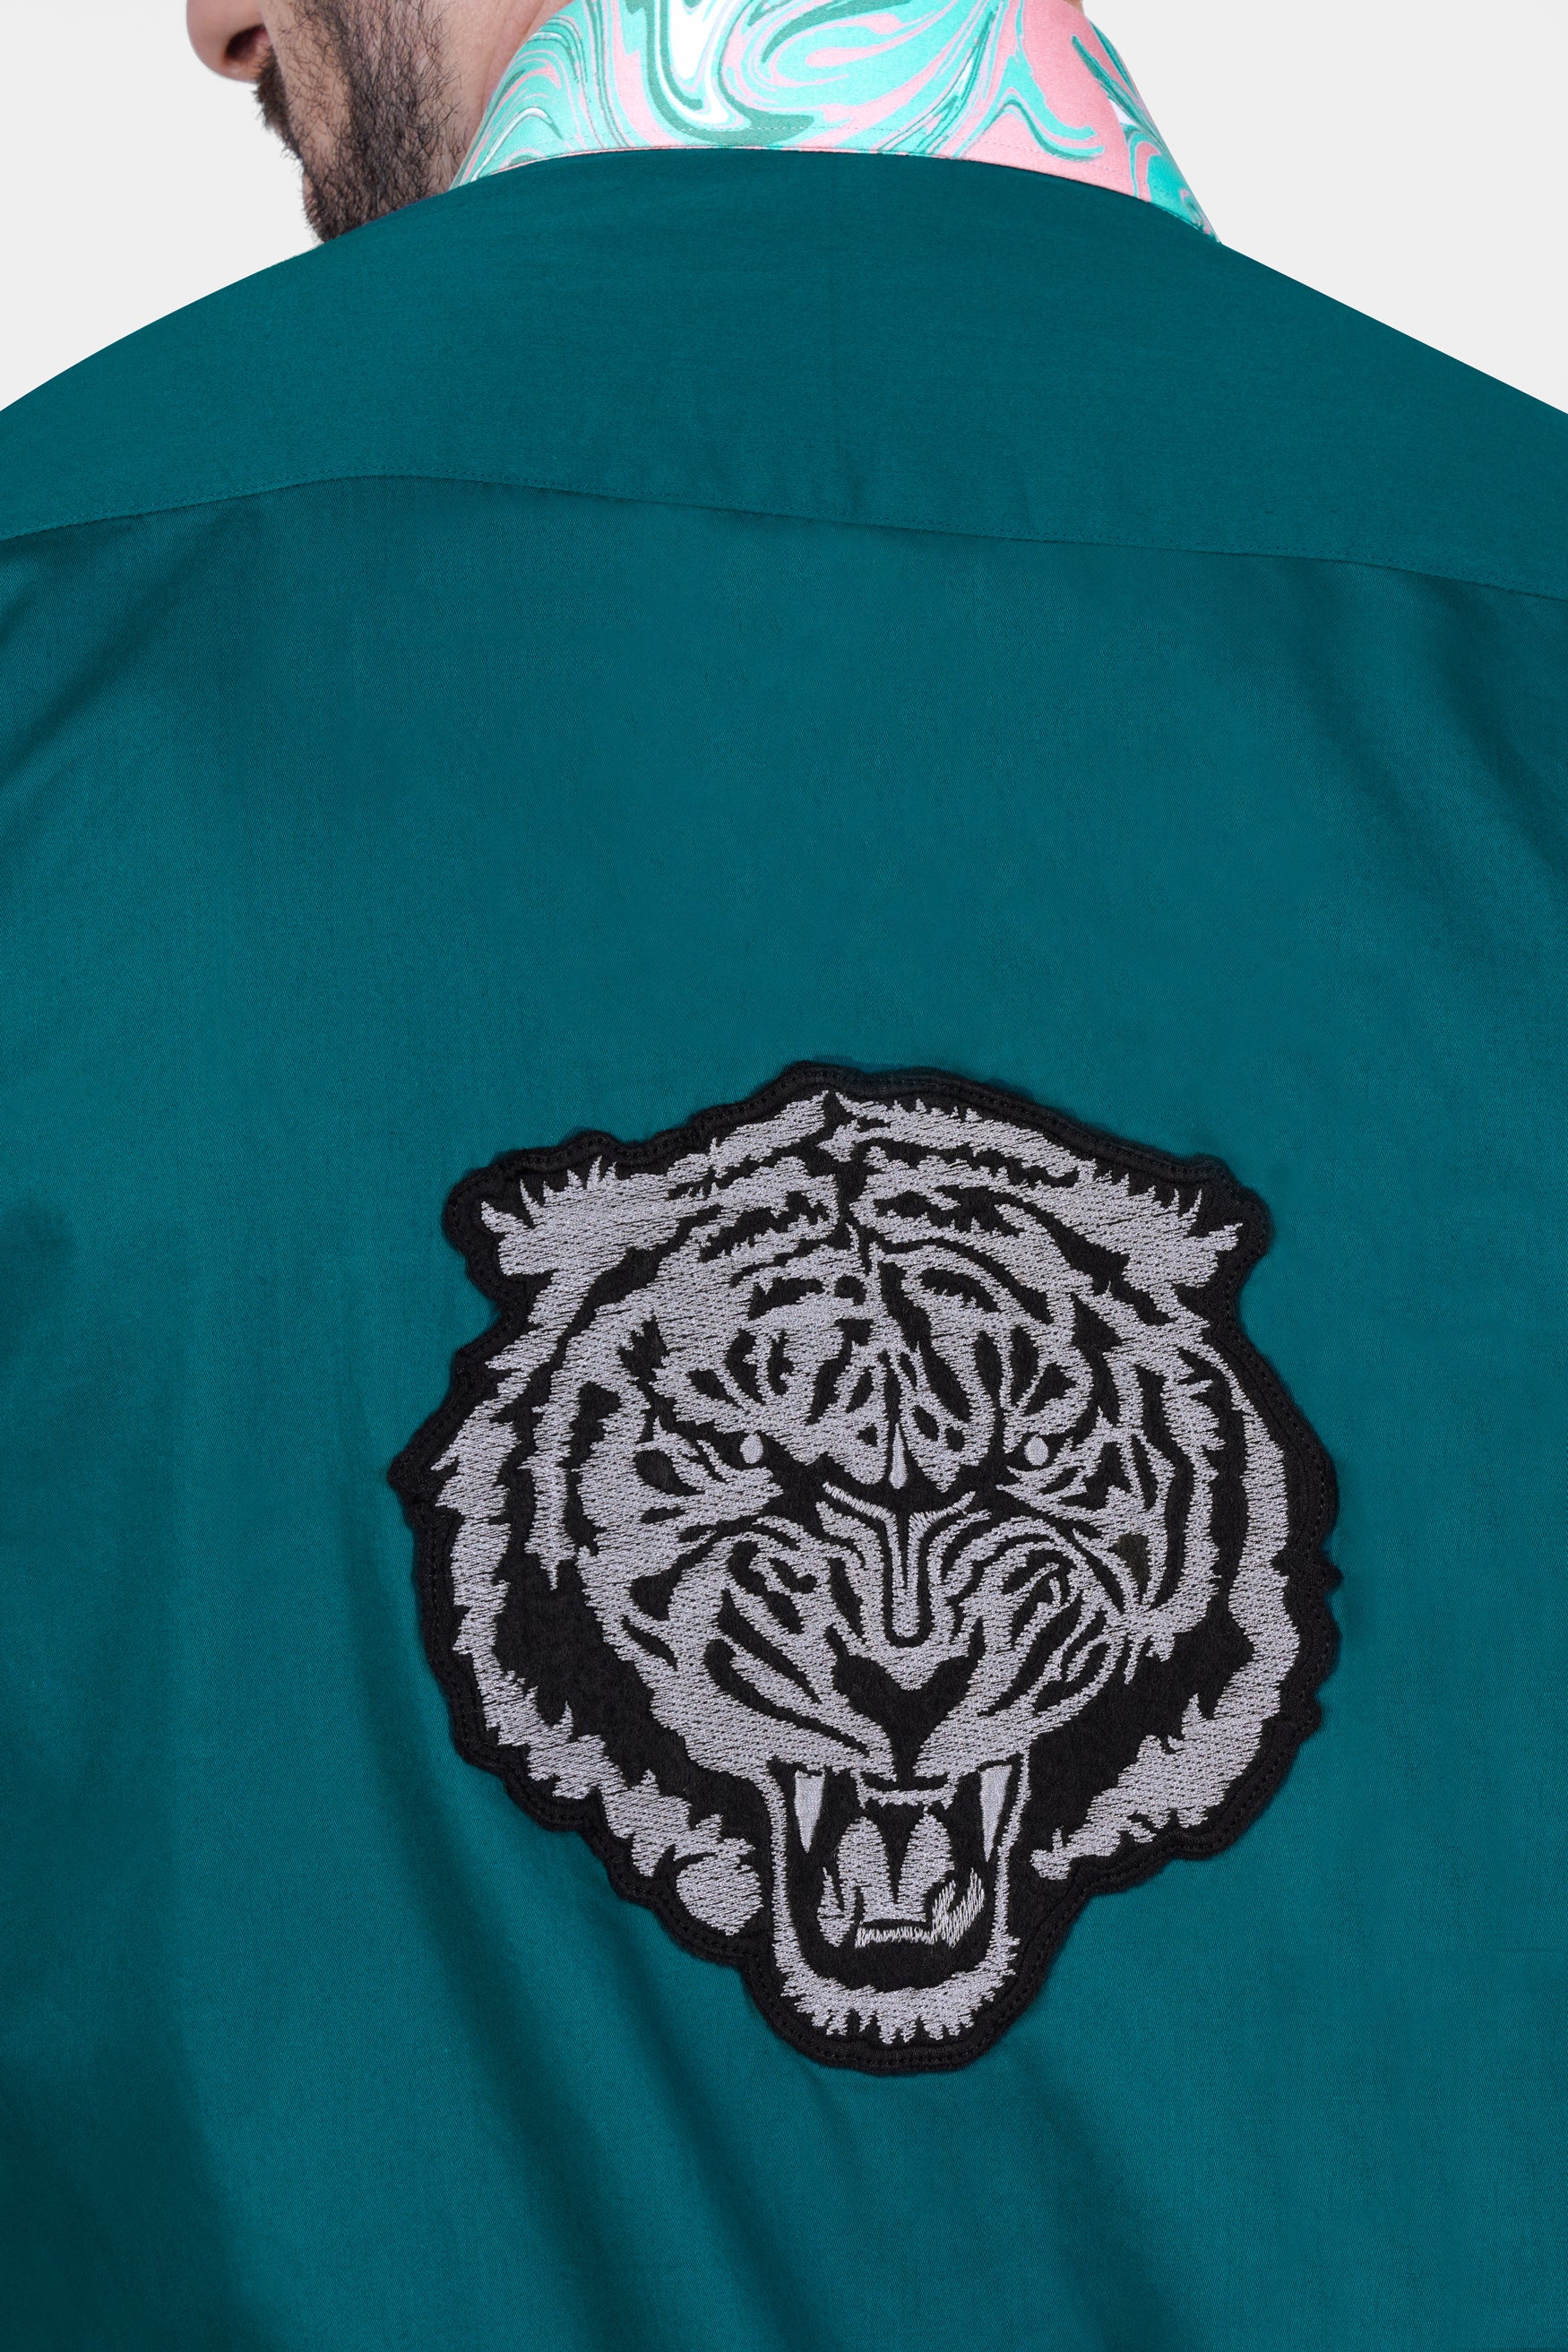 Teal Green Spider and Tiger Embroidered with Blizzard Blue and Cavern Pink Marble Printed Subtle Sheen Super Soft Premium Cotton Designer Shirt 11949-P815-38, 11949-P815-H-38, 11949-P815-39, 11949-P815-H-39, 11949-P815-40, 11949-P815-H-40, 11949-P815-42, 11949-P815-H-42, 11949-P815-44, 11949-P815-H-44, 11949-P815-46, 11949-P815-H-46, 11949-P815-48, 11949-P815-H-48, 11949-P815-50, 11949-P815-H-50, 11949-P815-52, 11949-P815-H-52